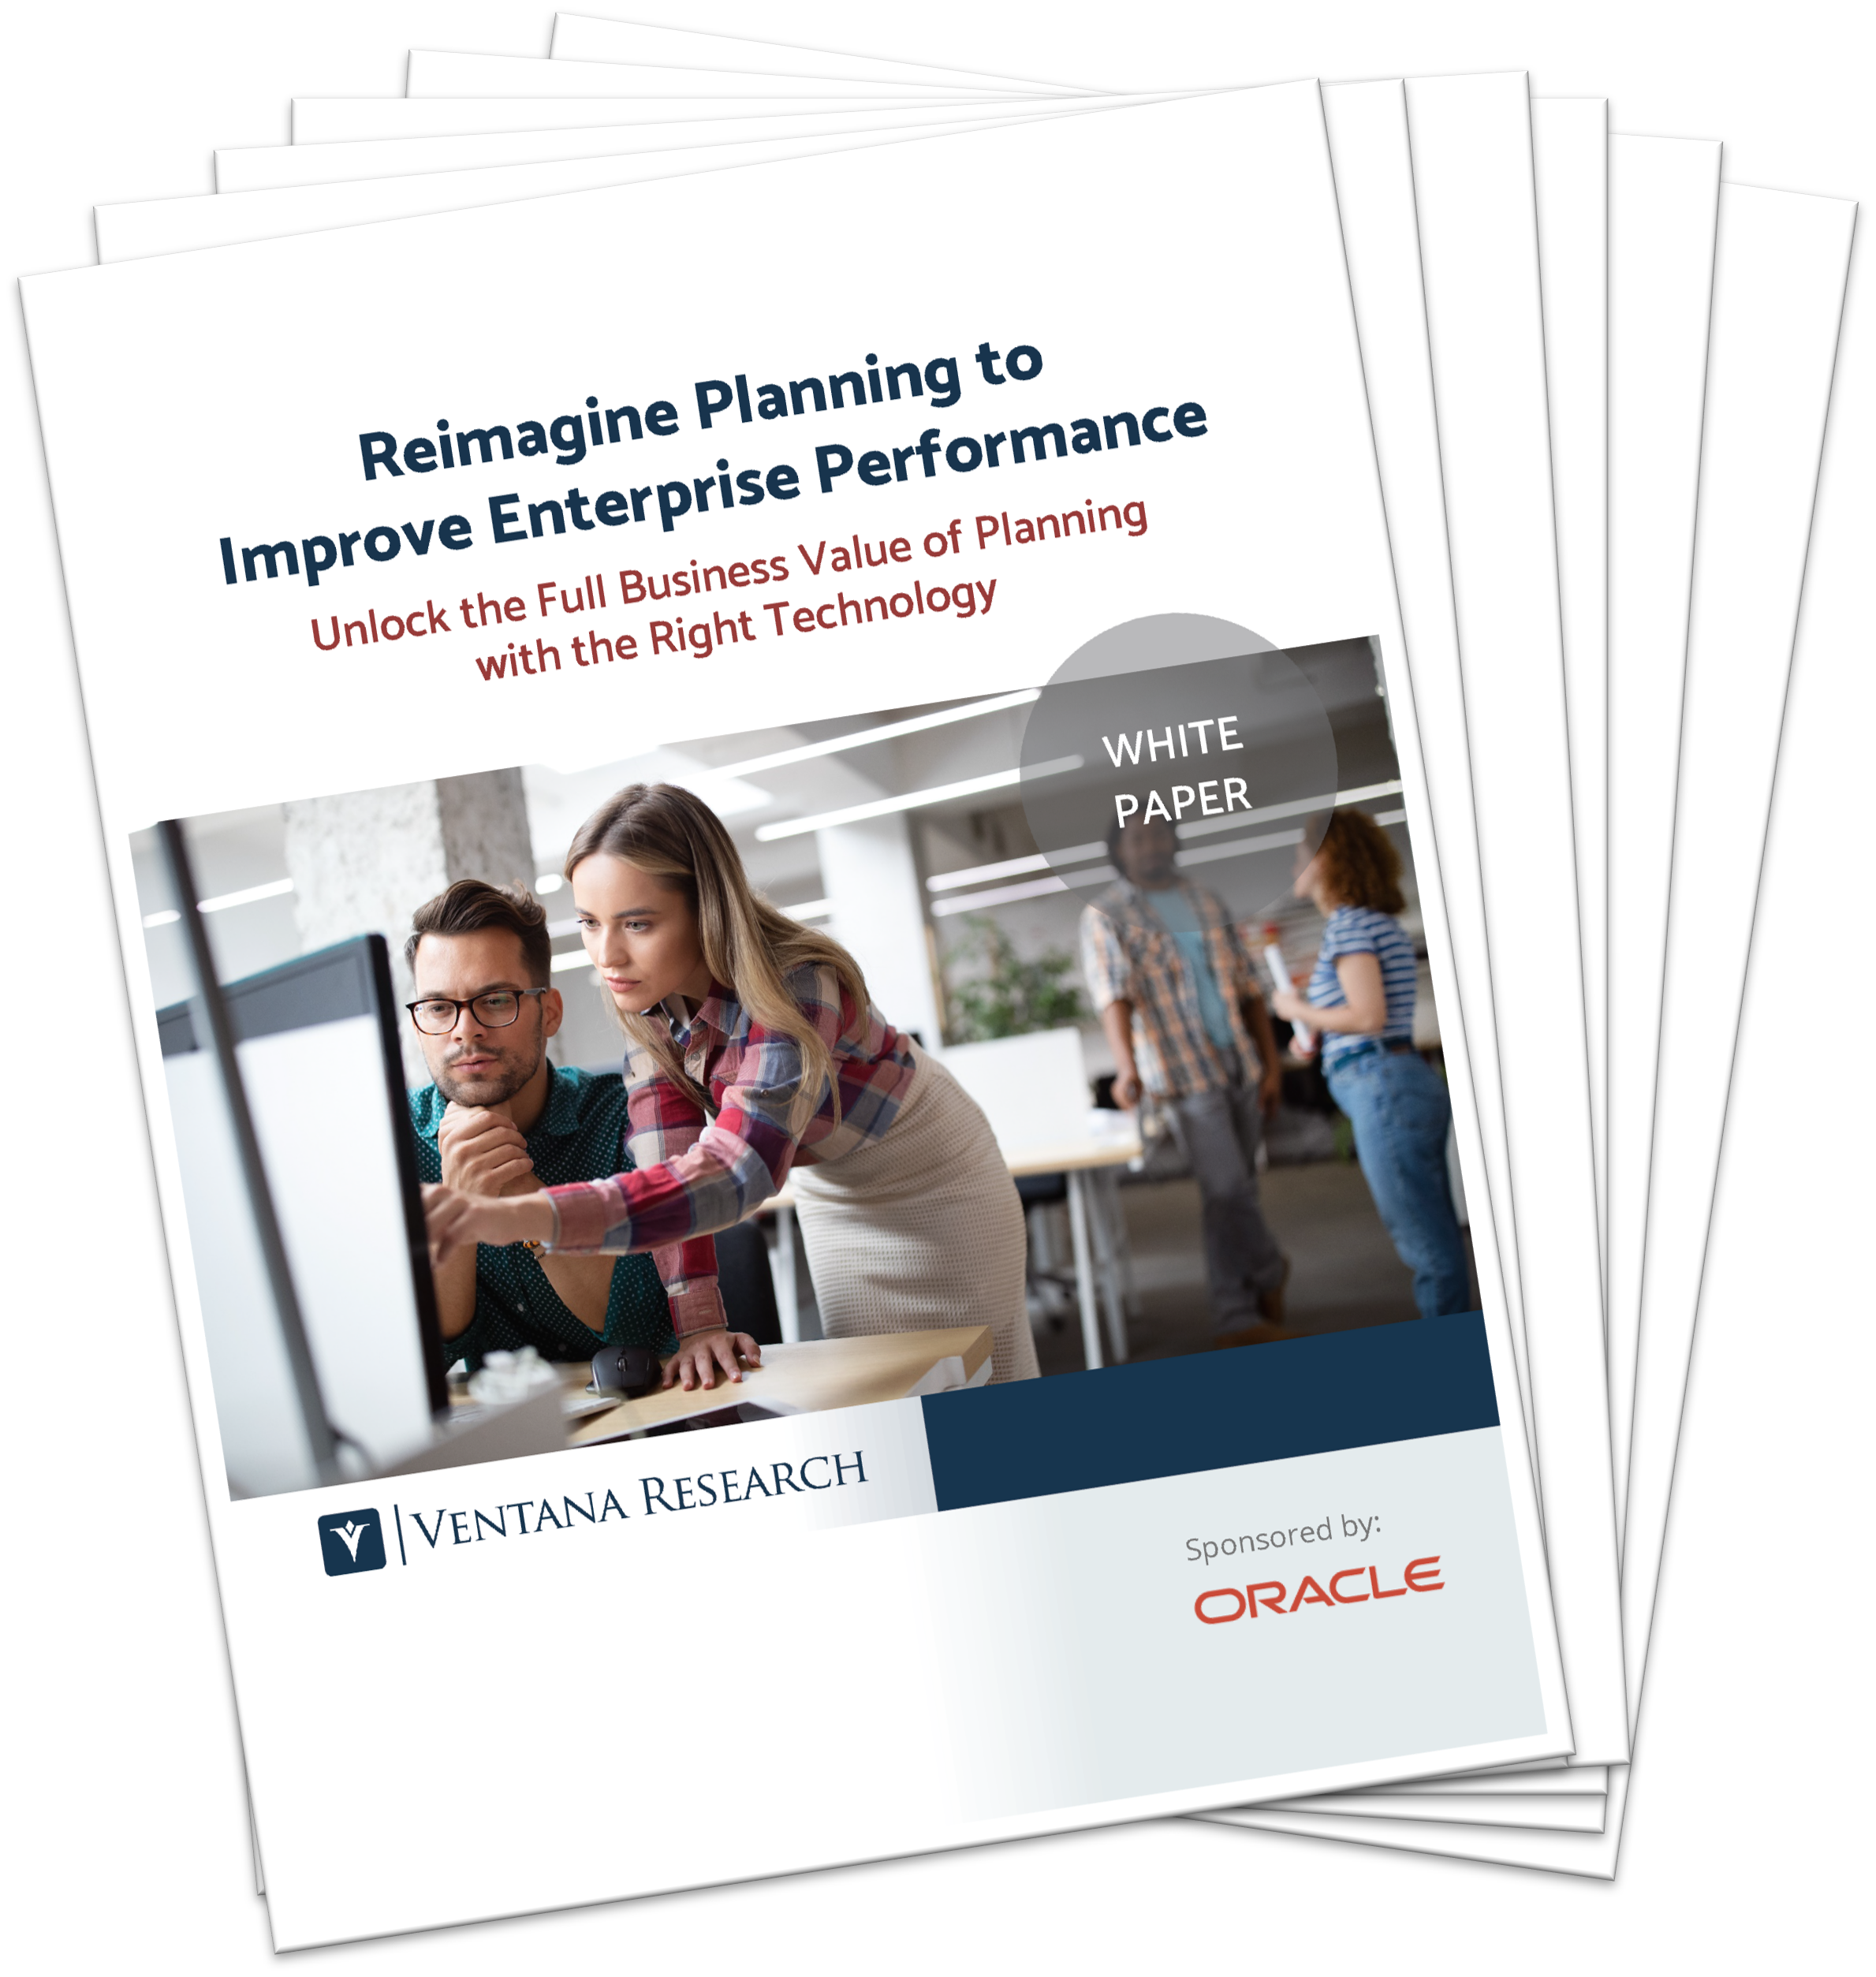 Ventana_Research_White_Paper_Oracle_Reimagine_Planning_to_Improve_Enterprise_Performance_feature